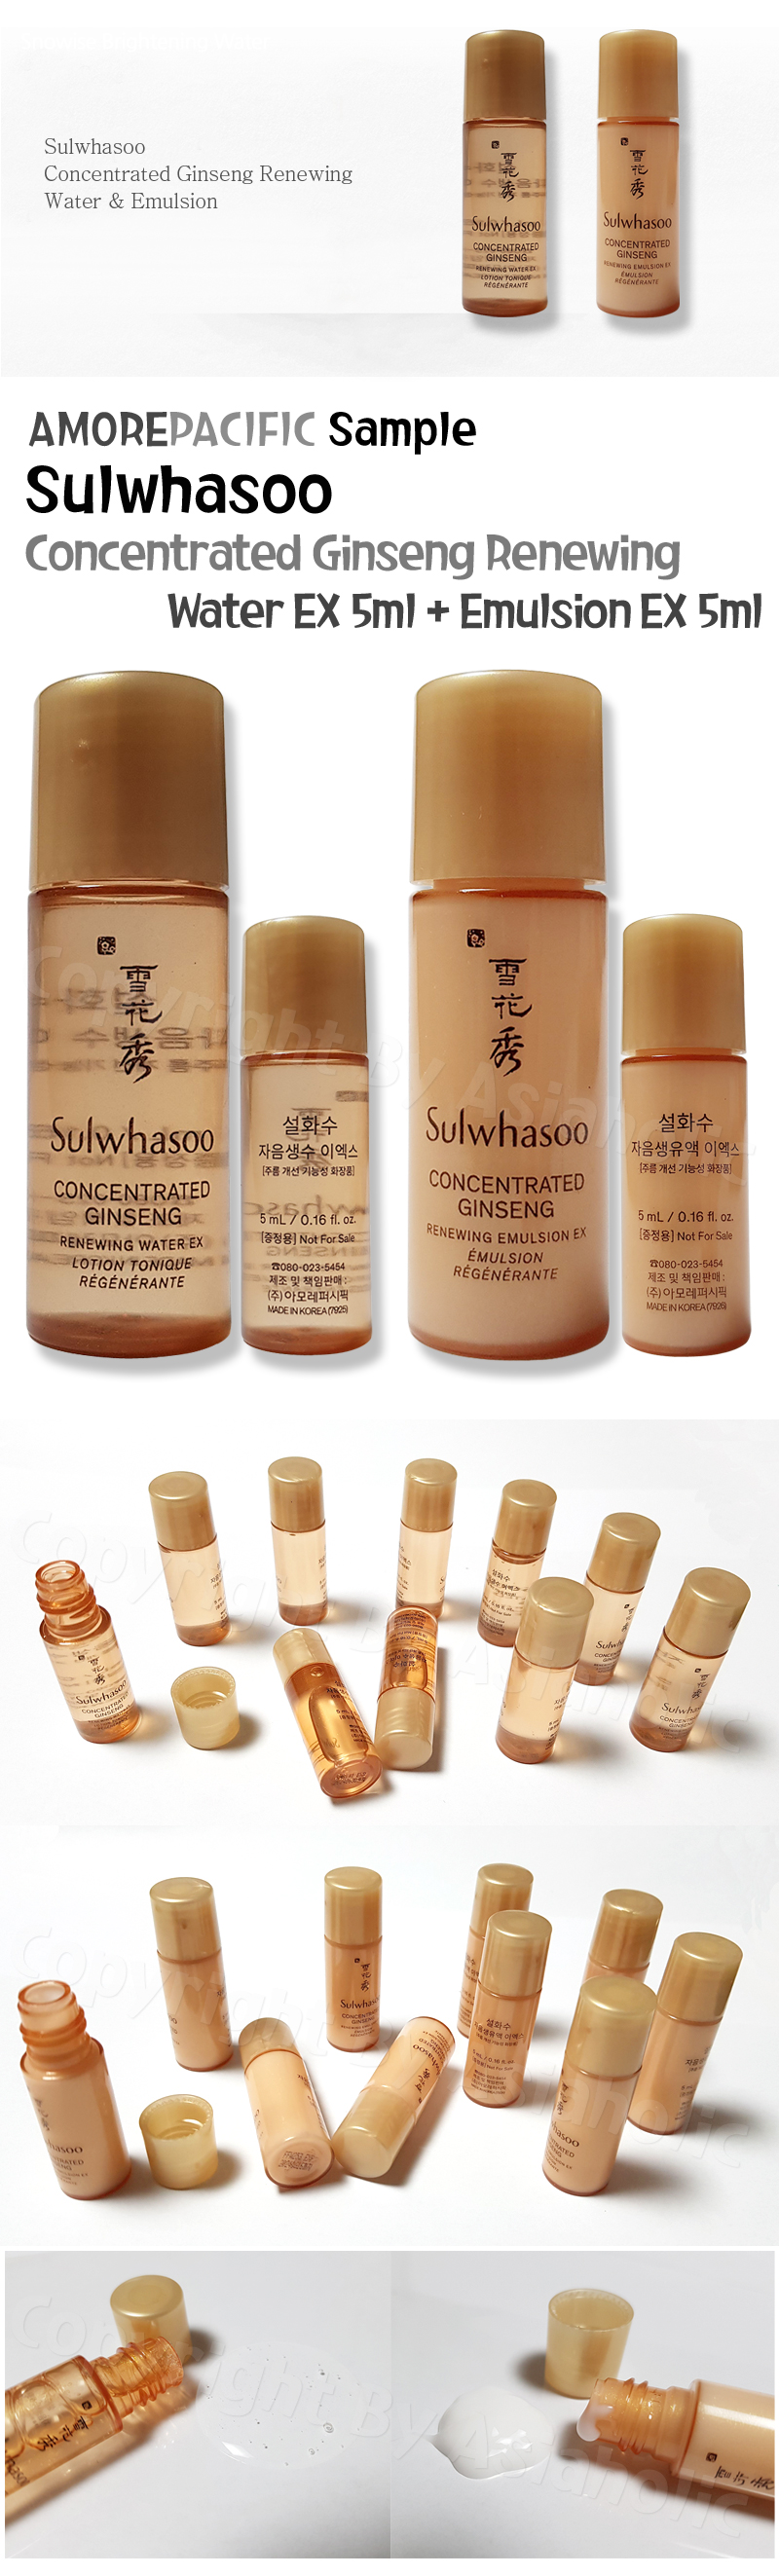 Sulwhasoo Concentrated Ginseng Renewing 5ml Water EX + Emulsion EX (8pcs~100pcs) Probe Newest Version